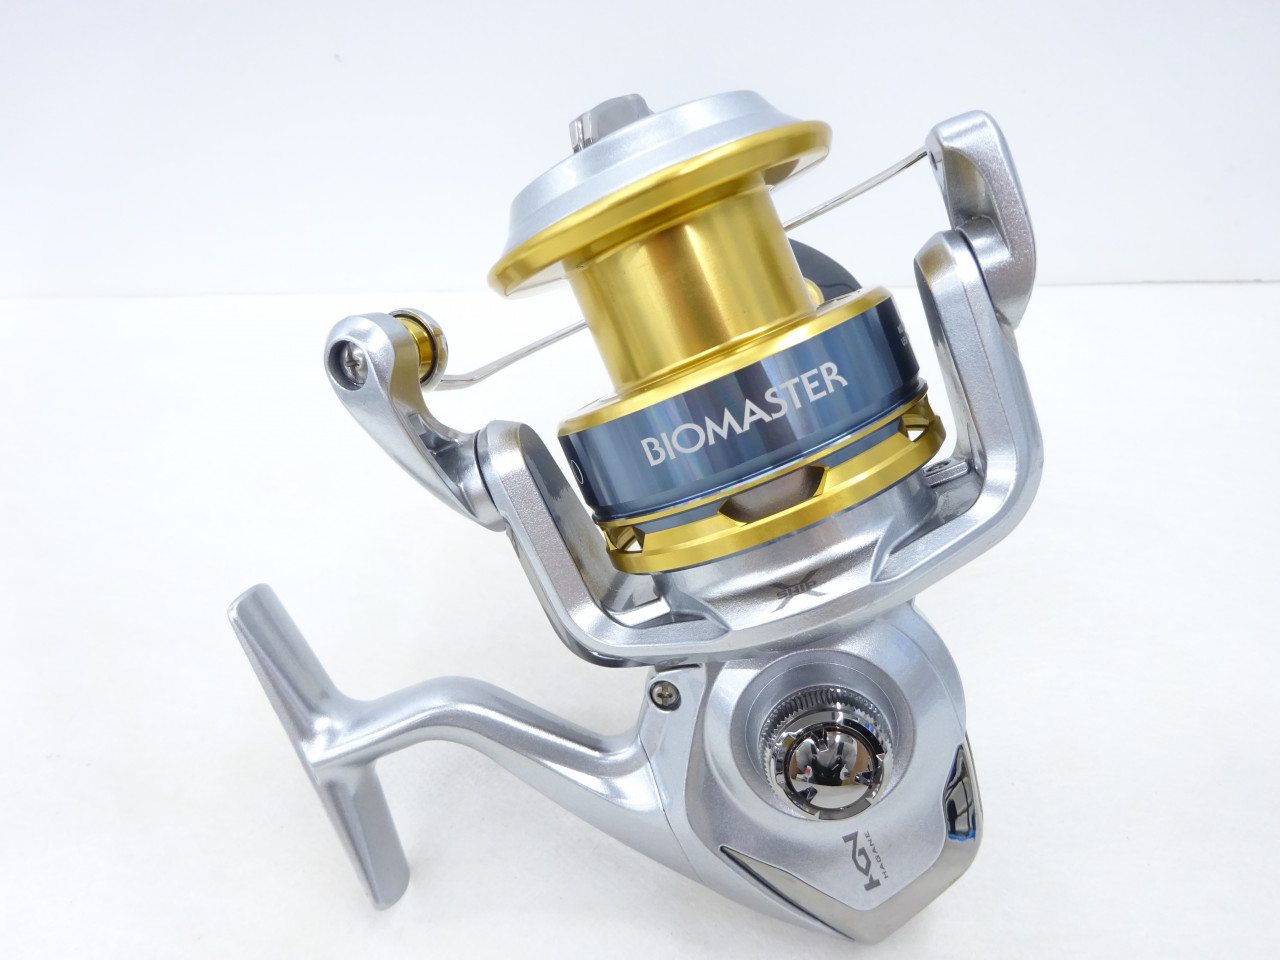 https://tackleoff.com/products/spinning-reel/no6000-/542910